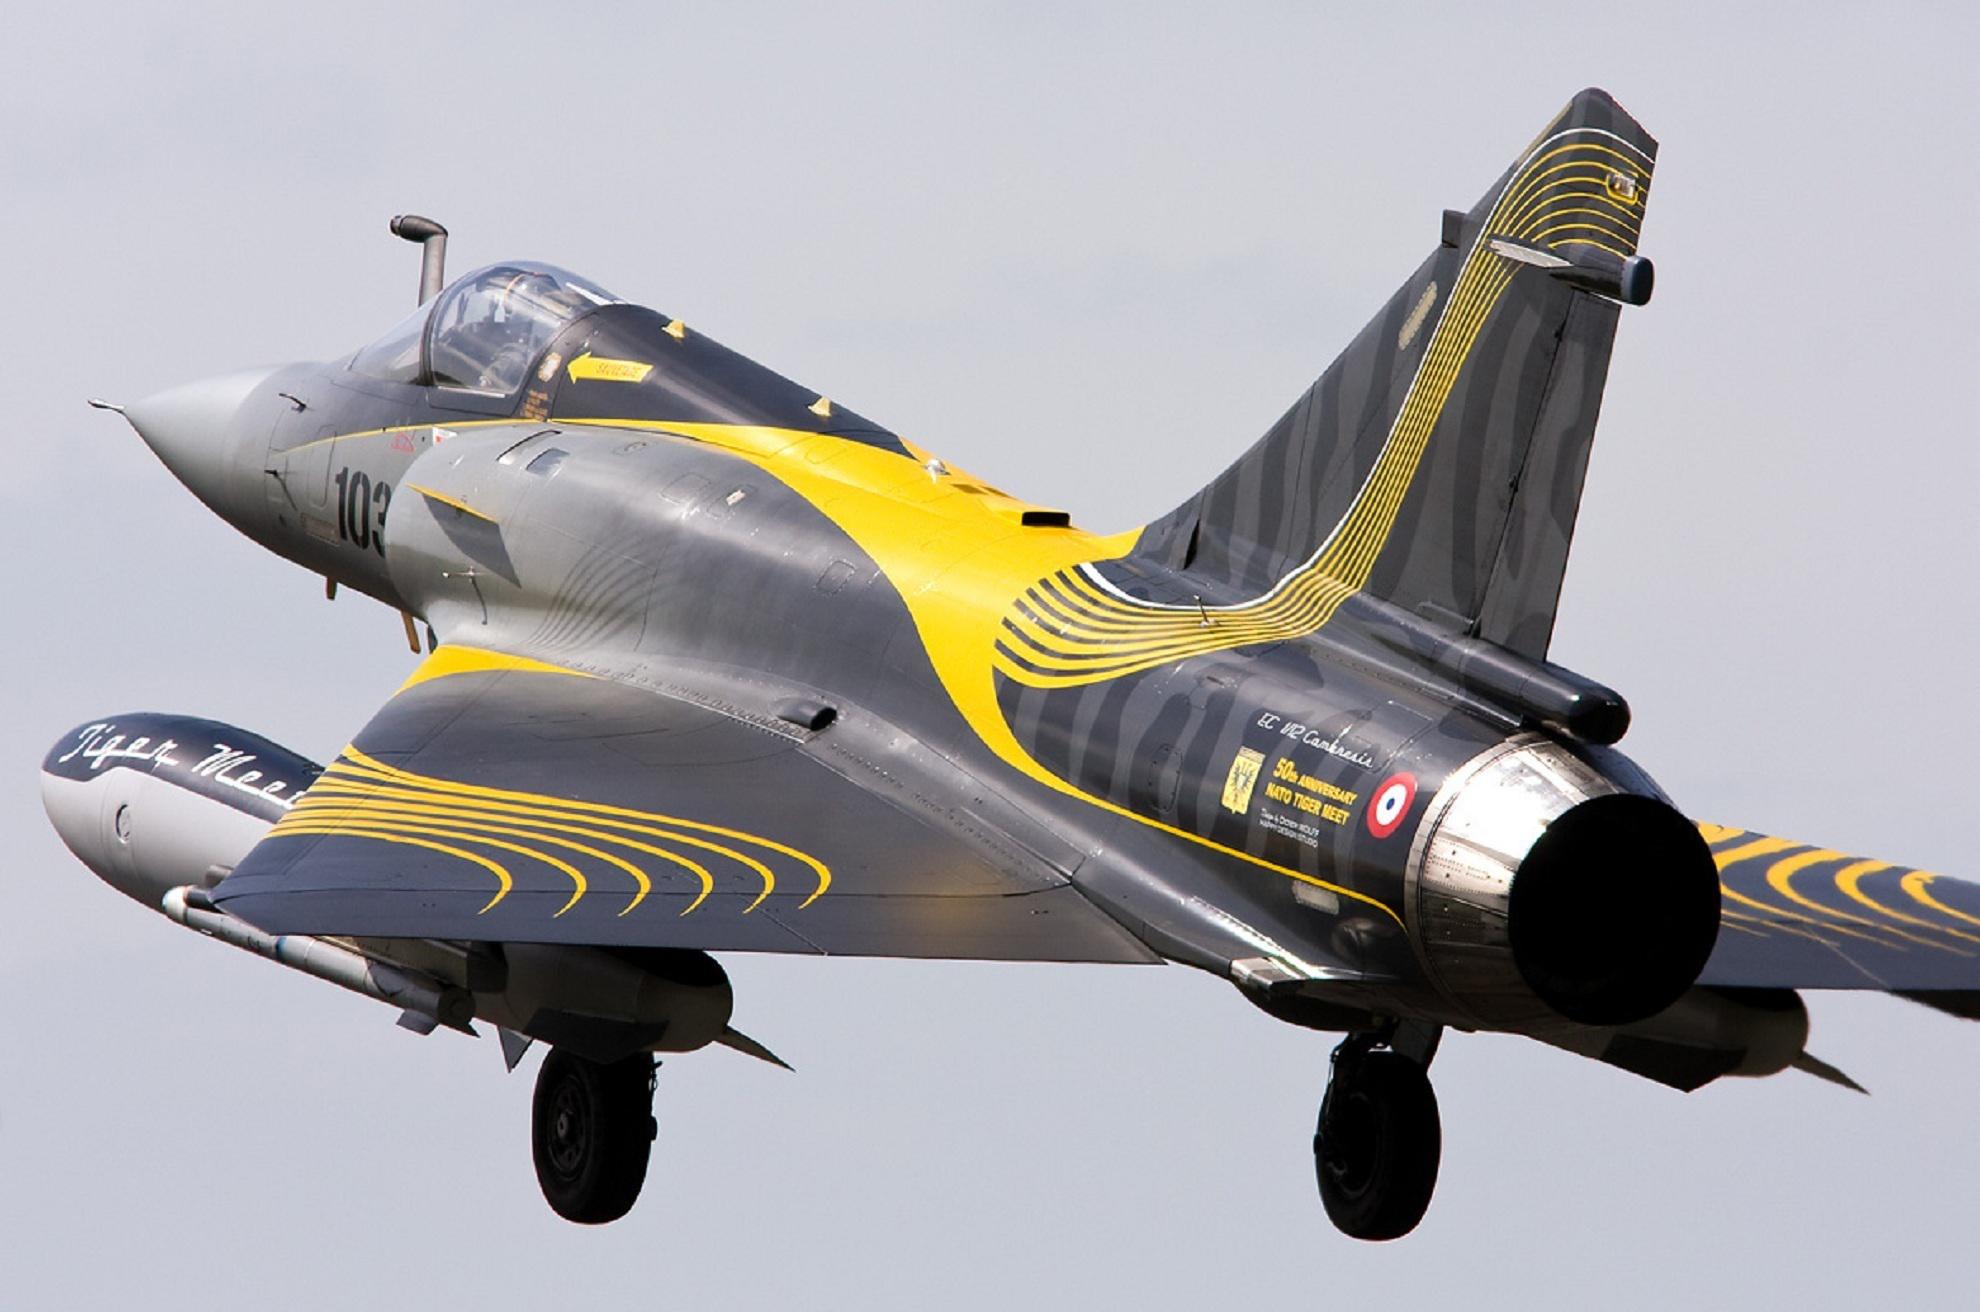 Dassault Mirage 2000 wallpapers HD quality